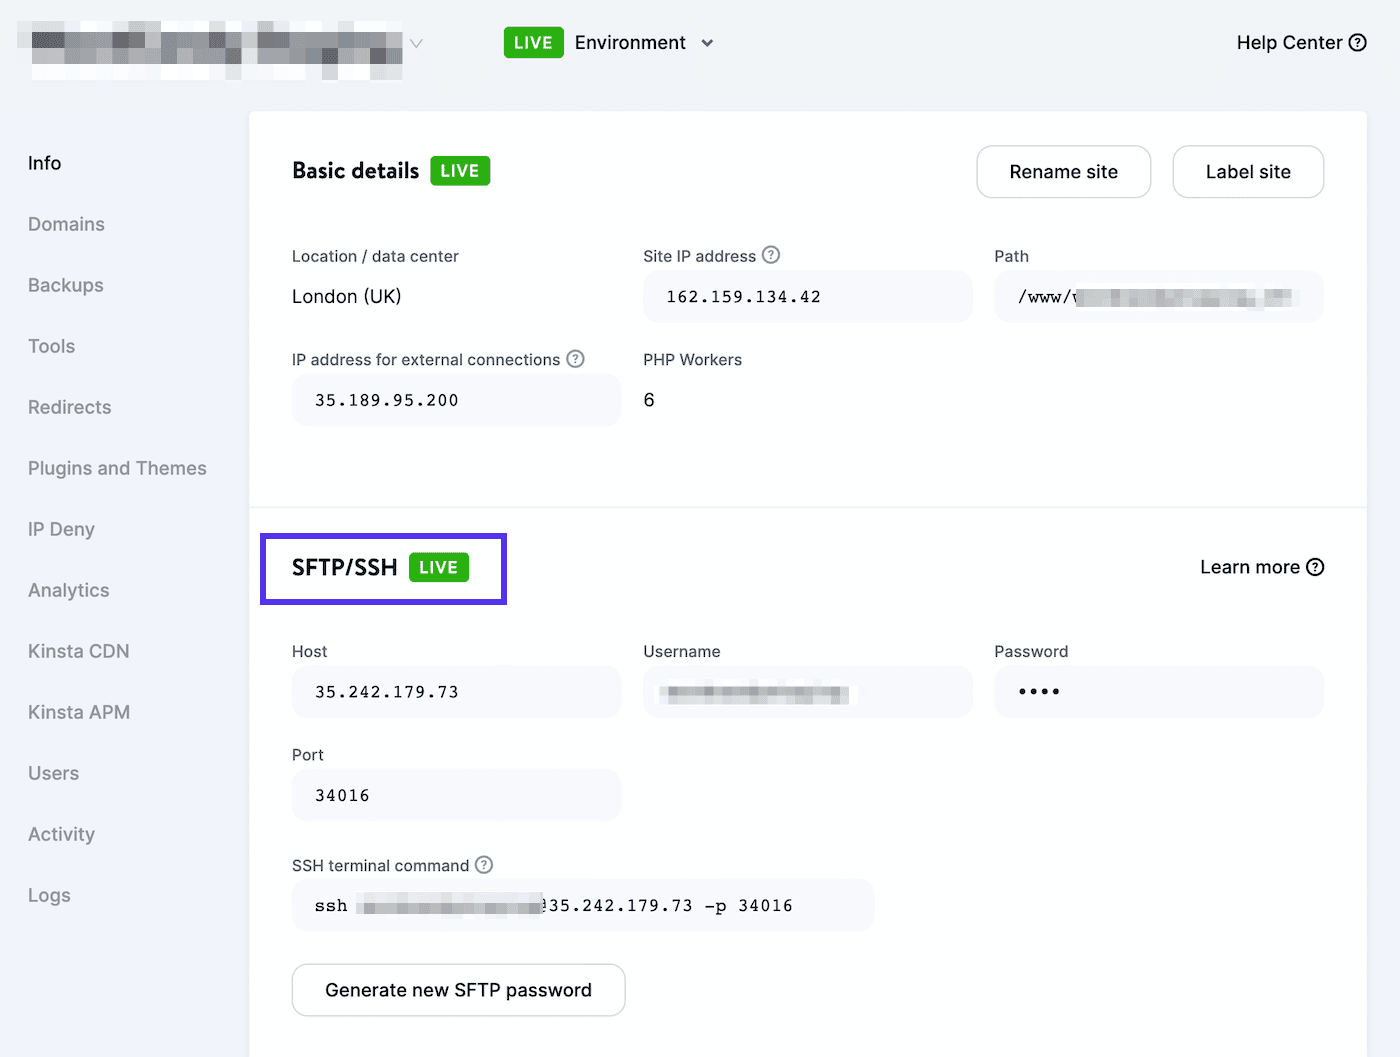 A look inside MyKinsta to see SFTP login credentials